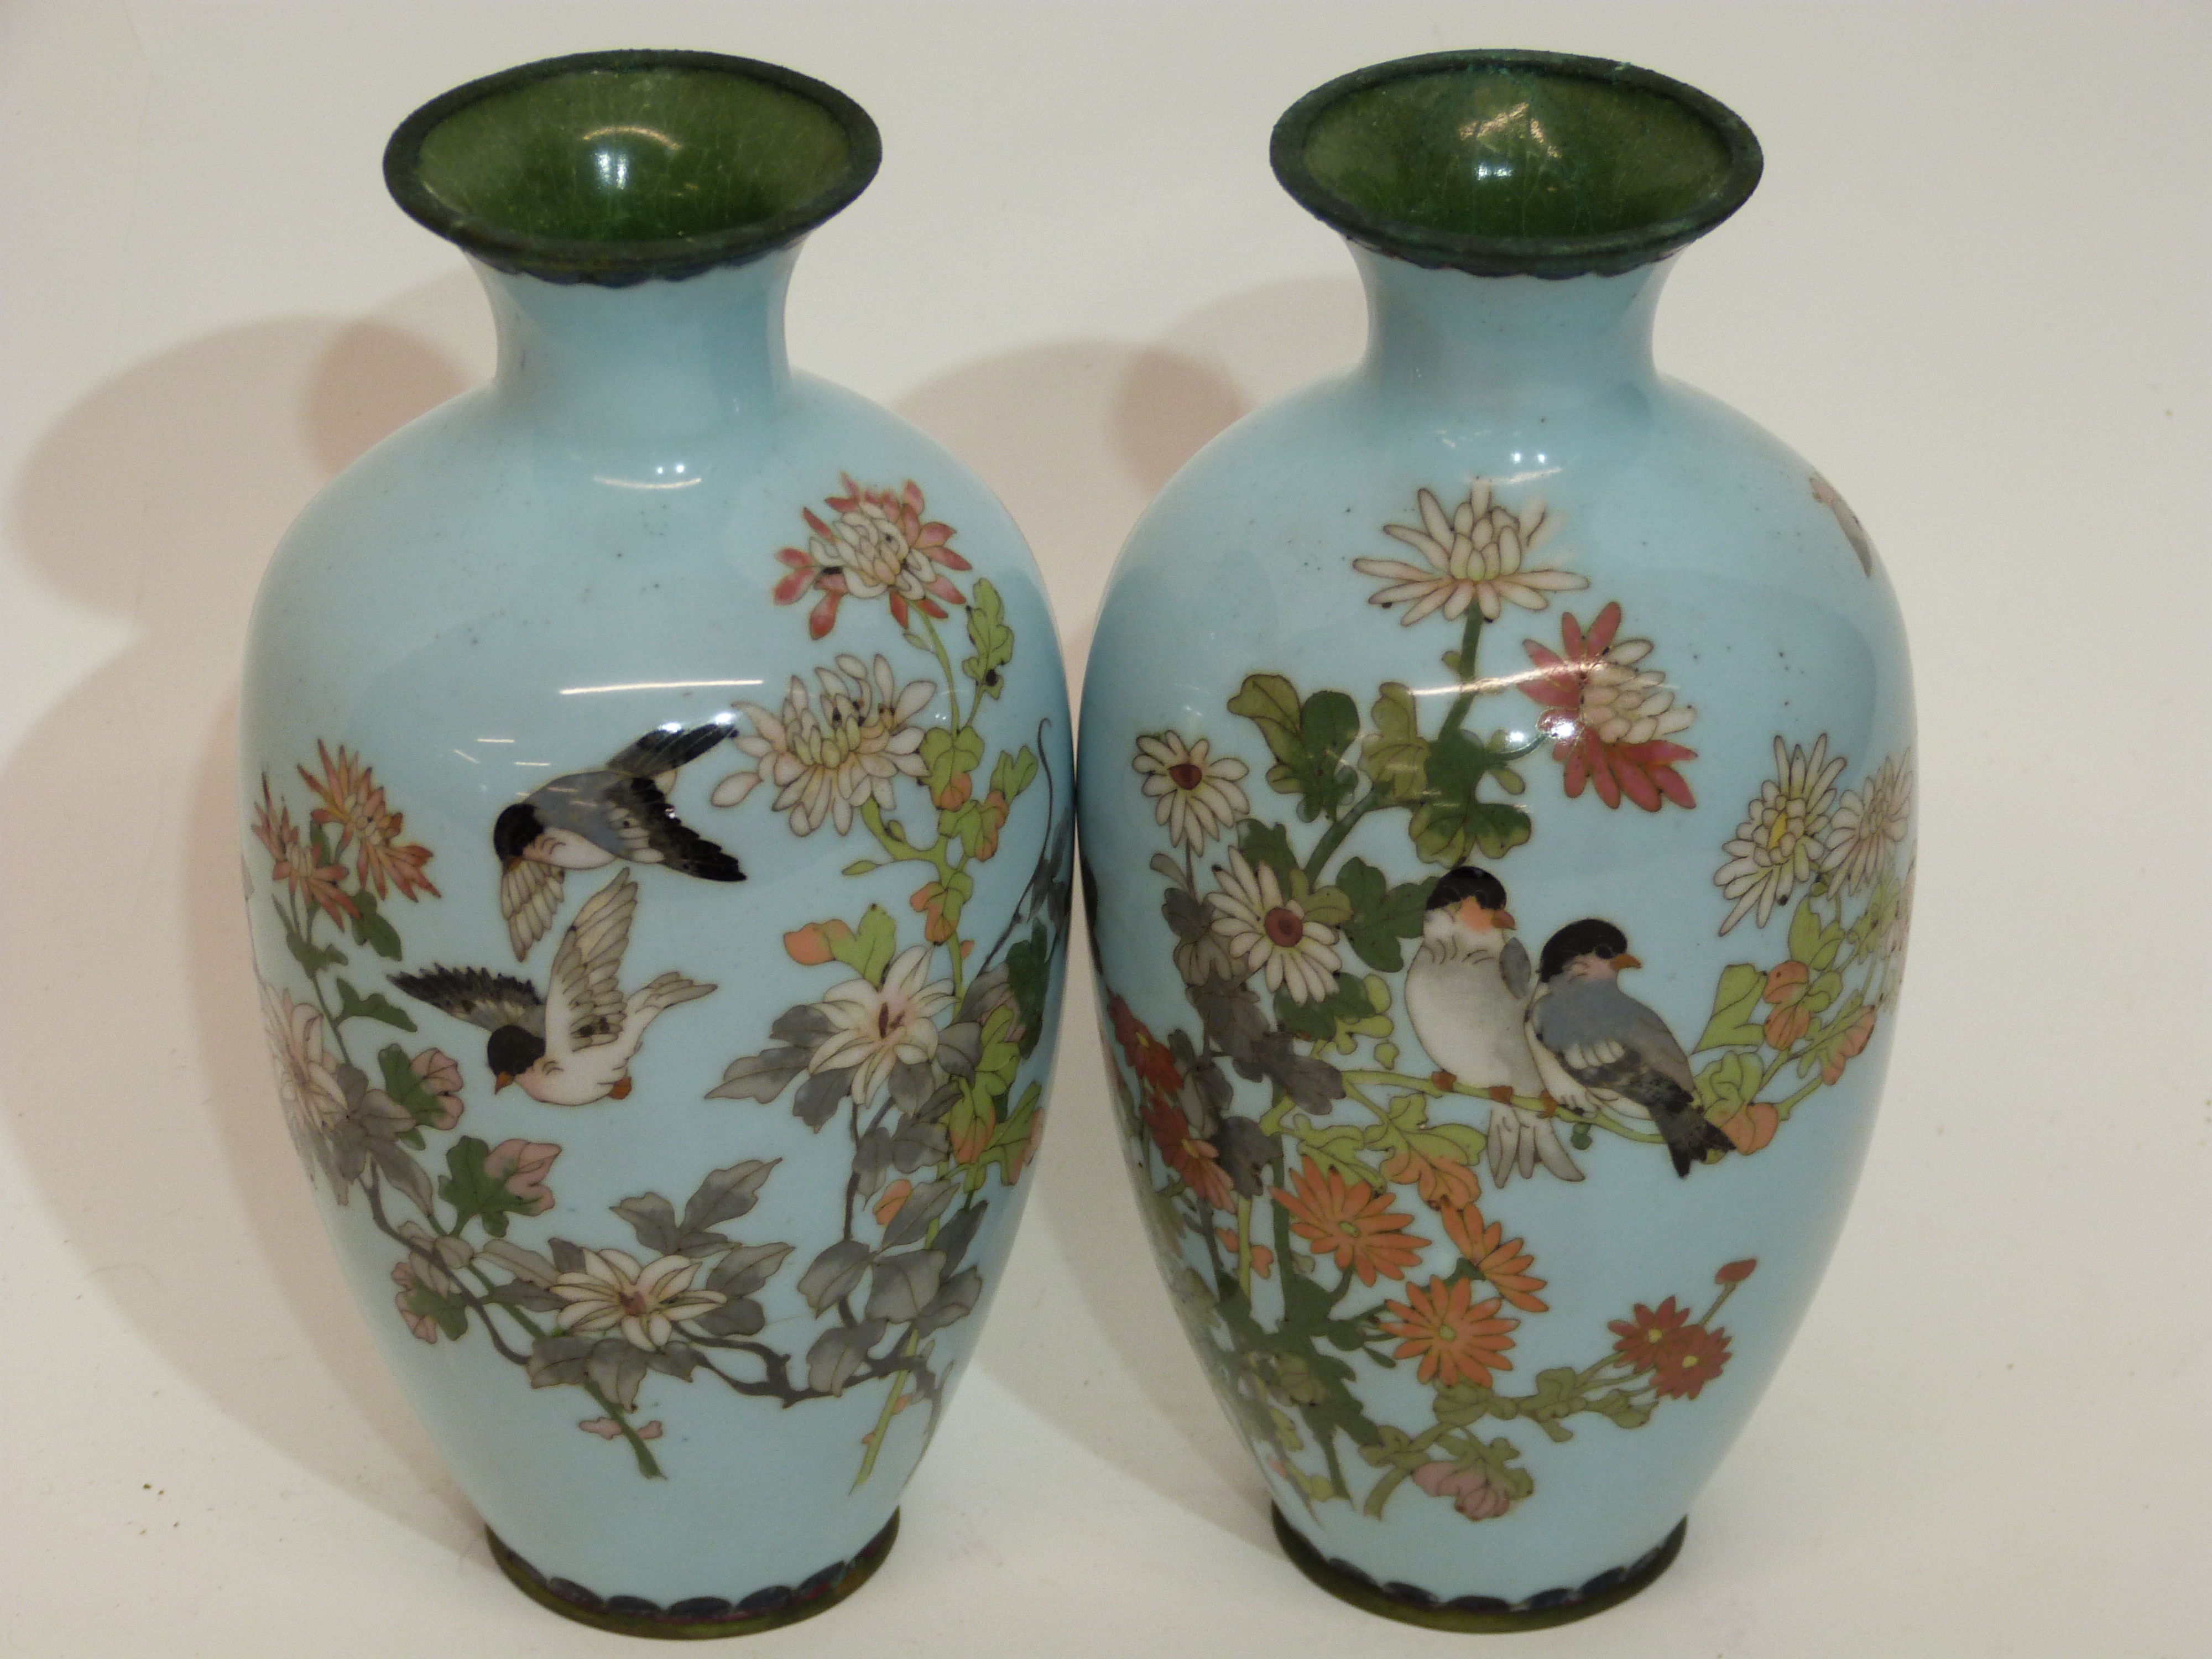 Pair of Japanese cloisonne vases, Meiji period, the light blue ground decorated with foliage and